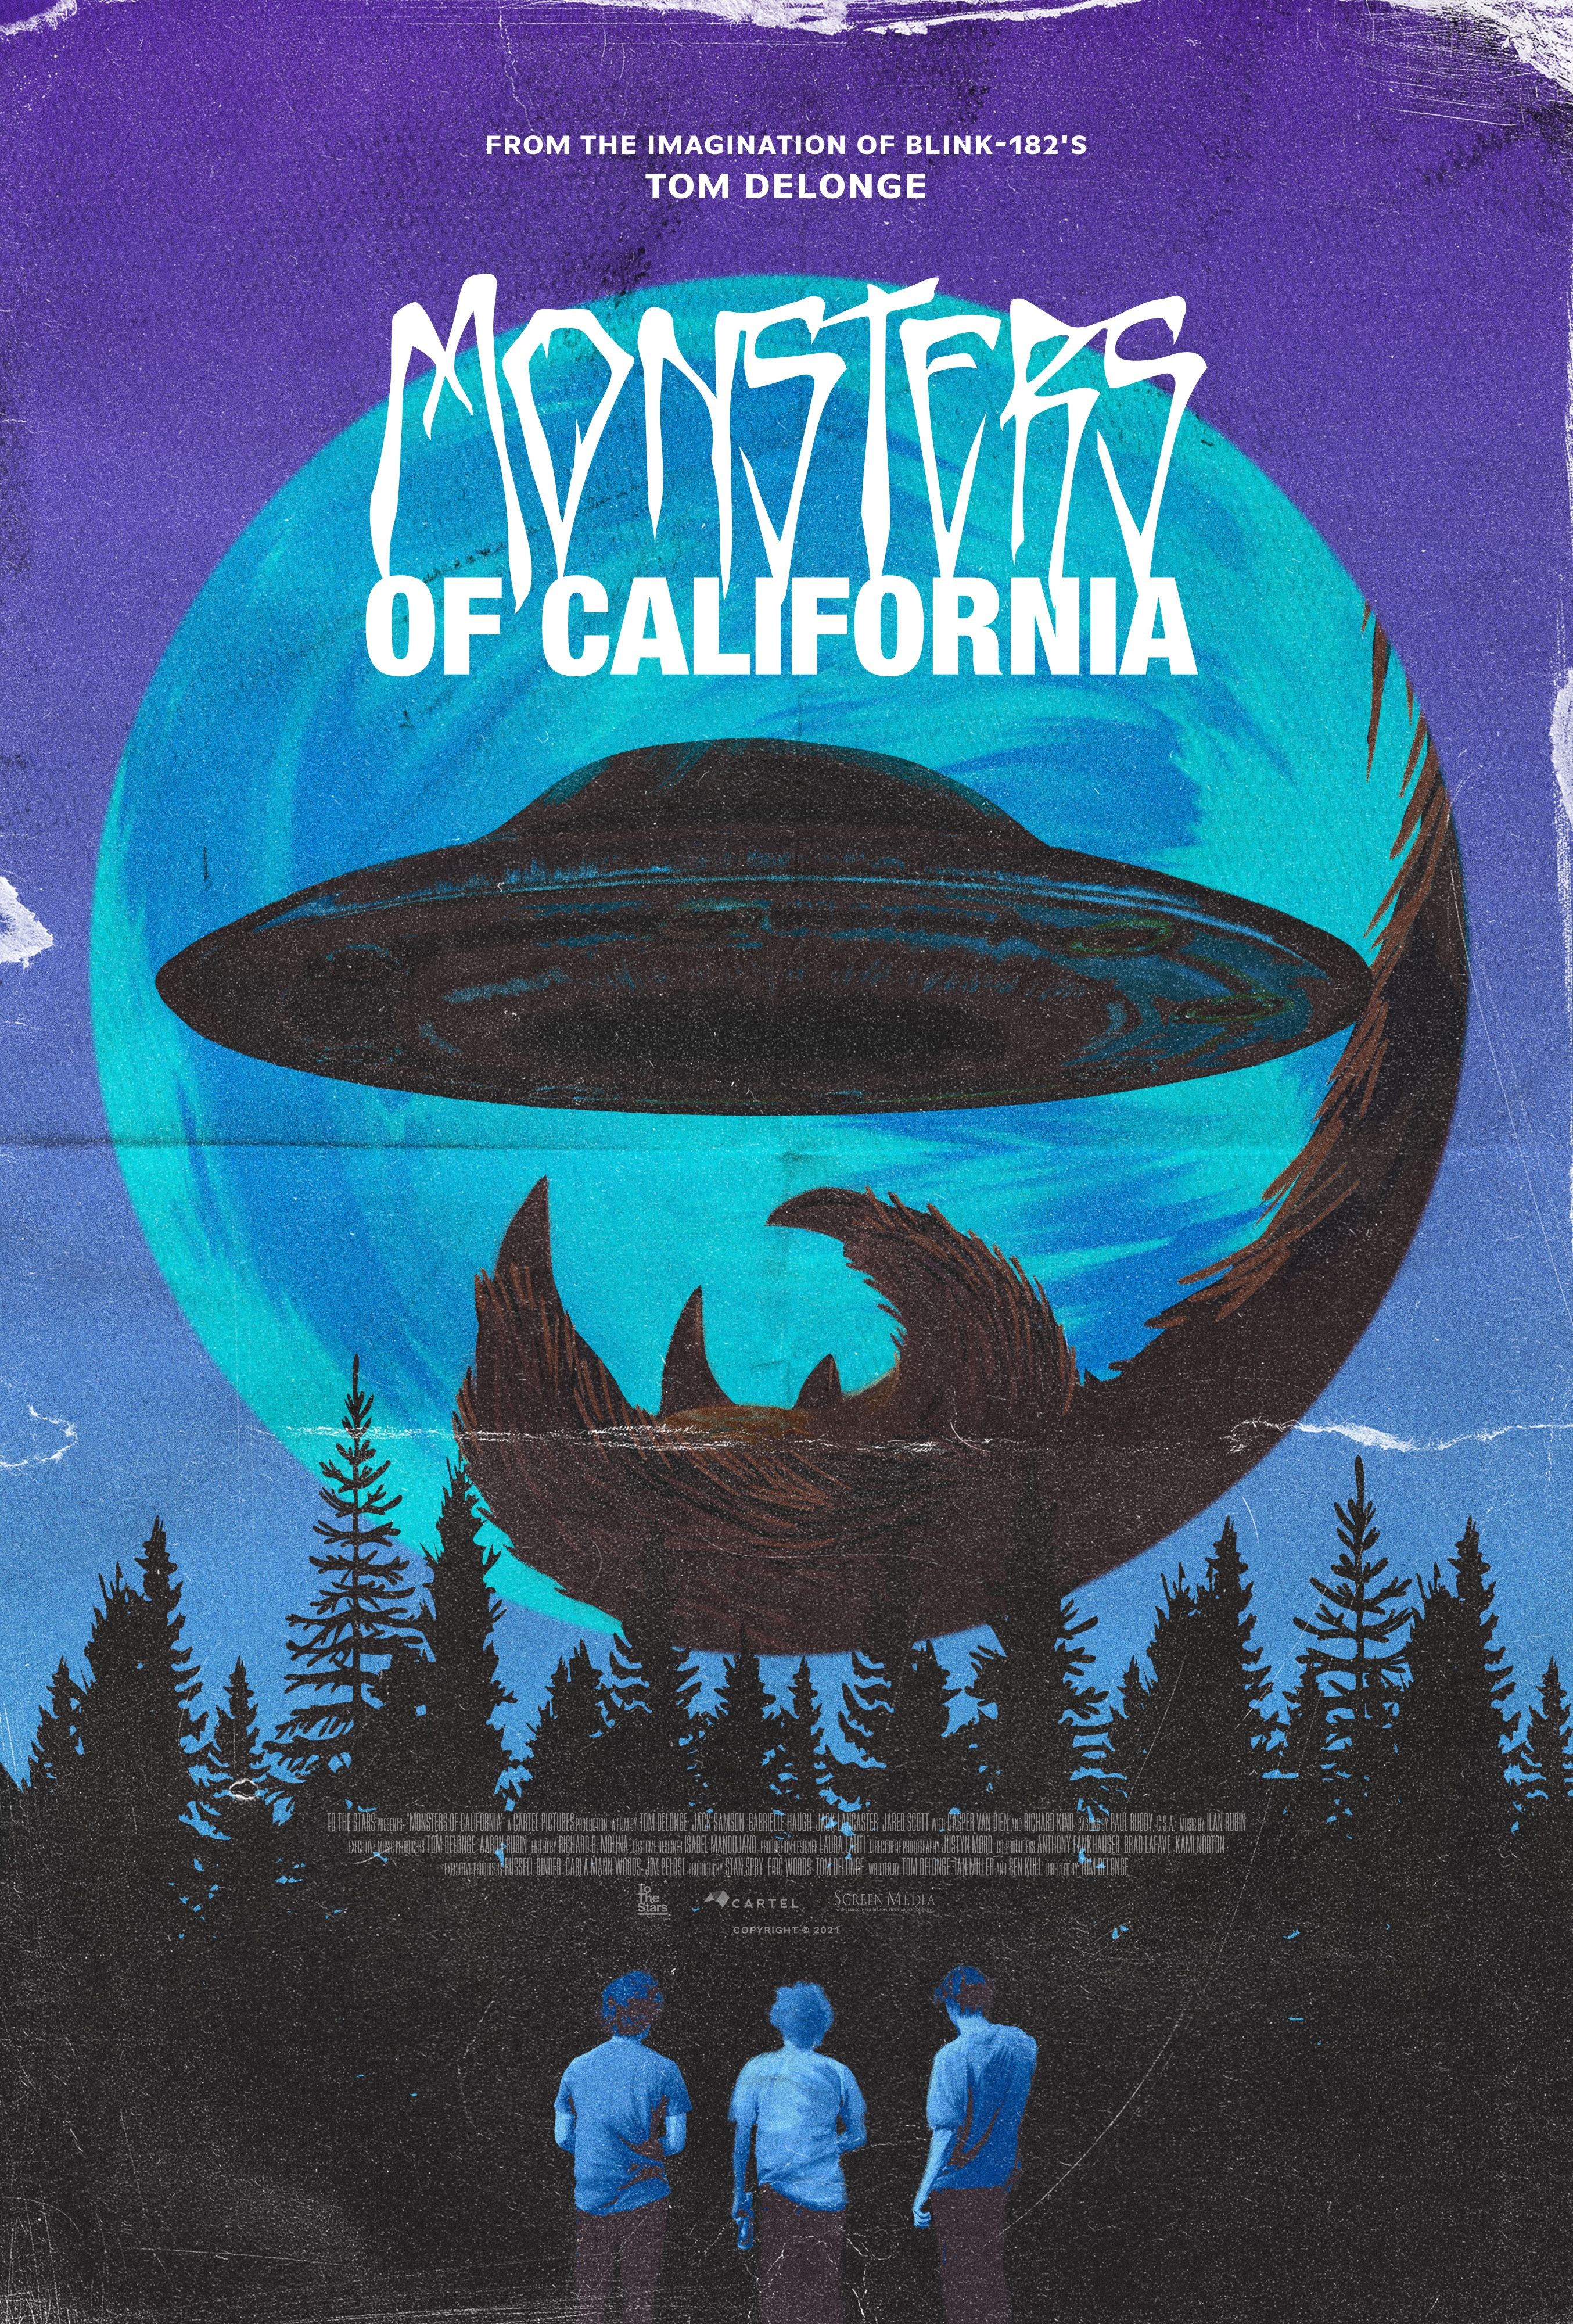 To The Stars*, Monsters of California